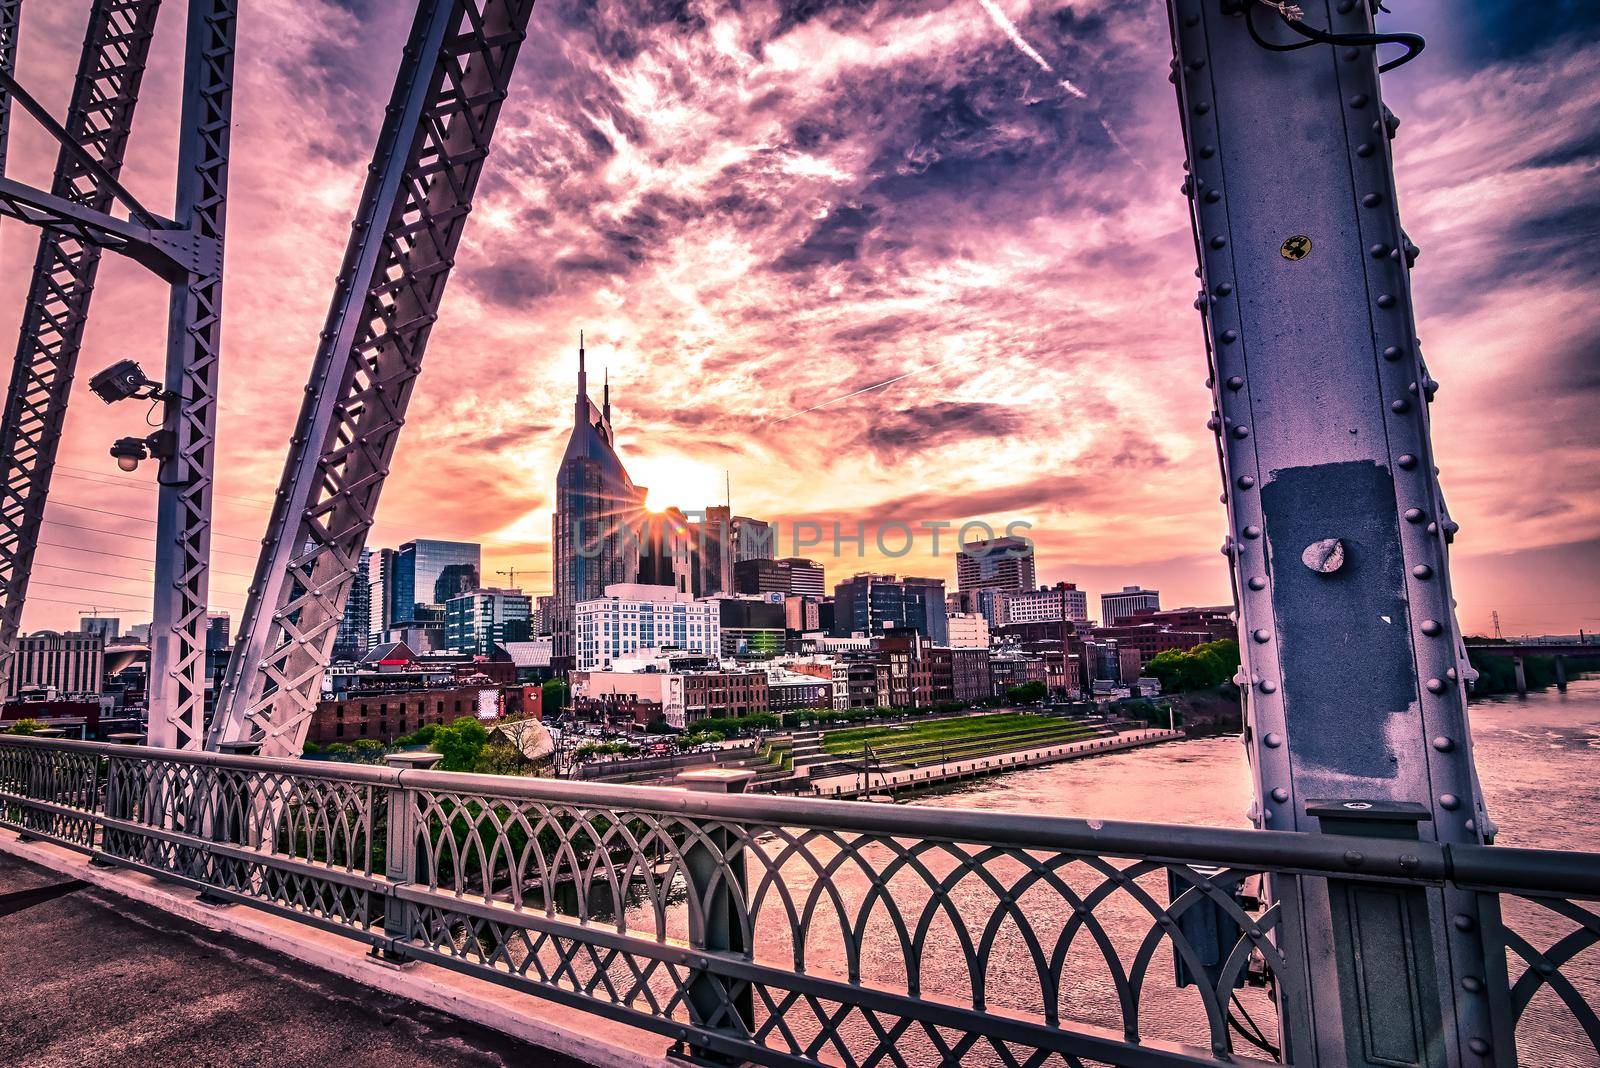 Nashville tennessee city skyline at sunset on the waterfrom